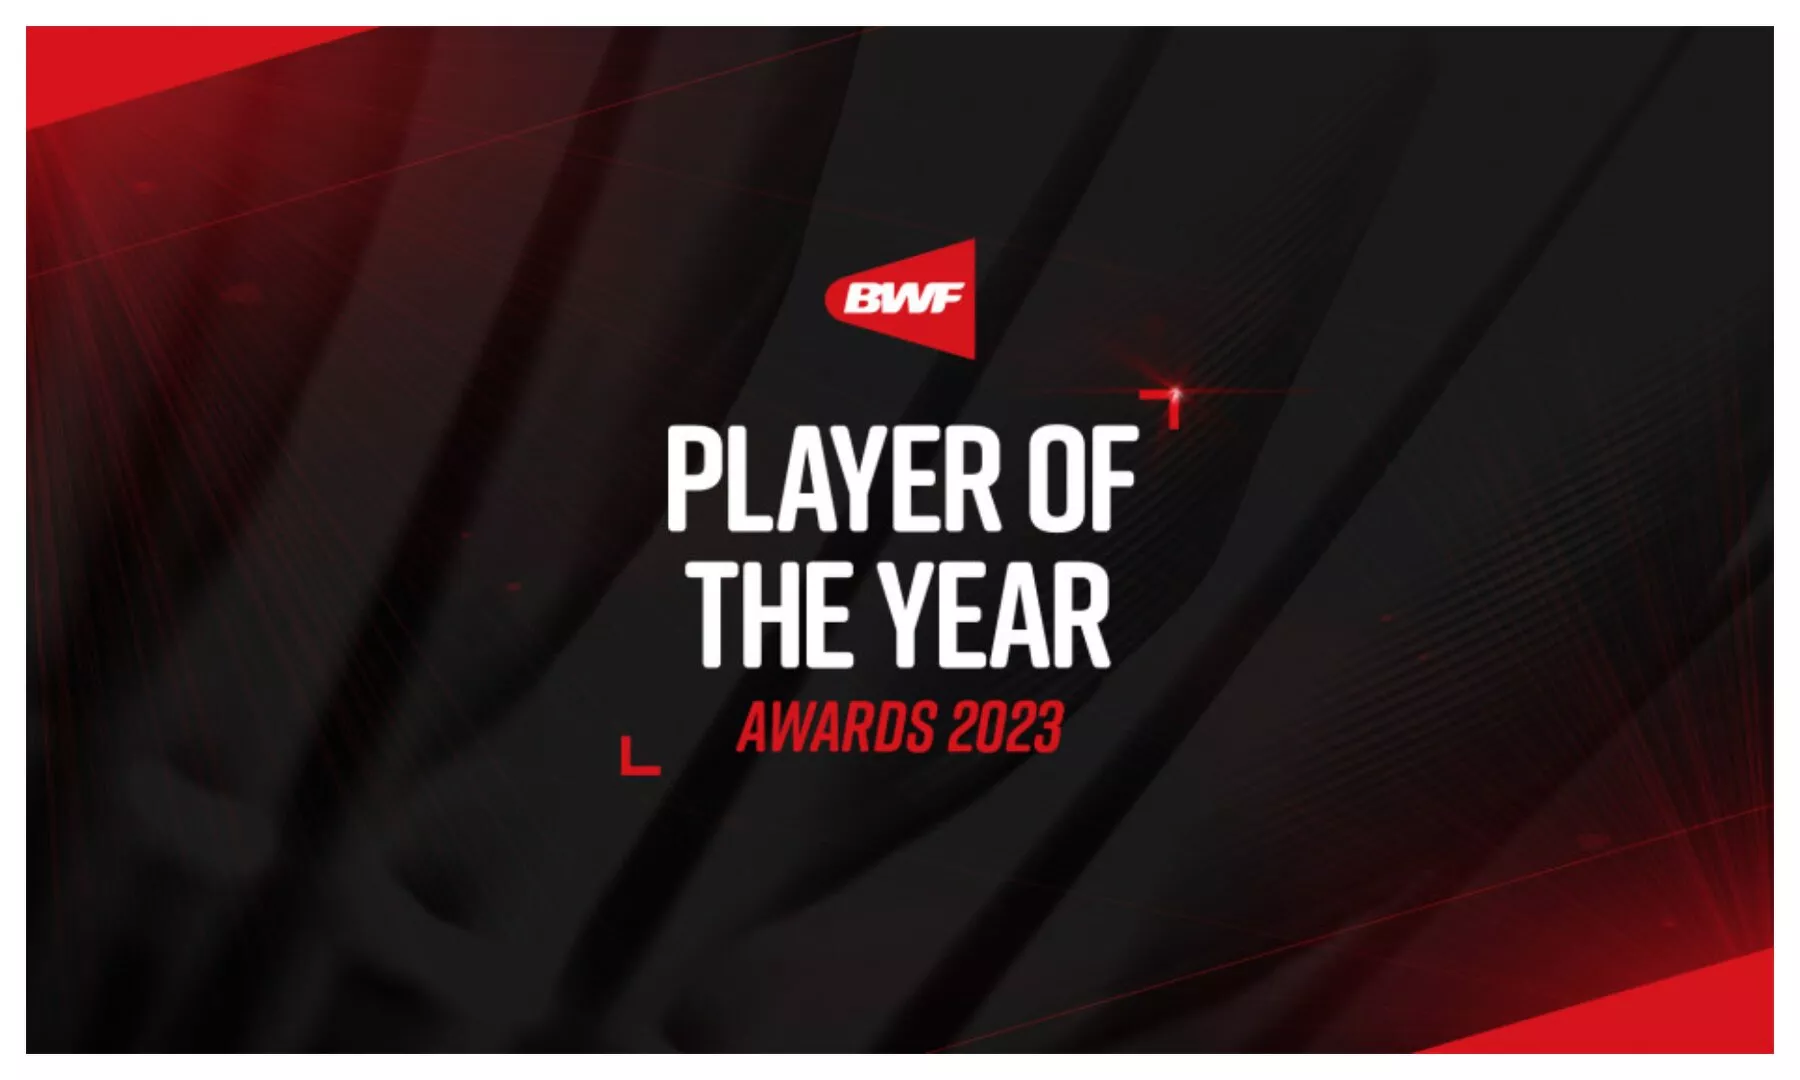 Full list of nominees for BWF Player of the Year Awards 2023